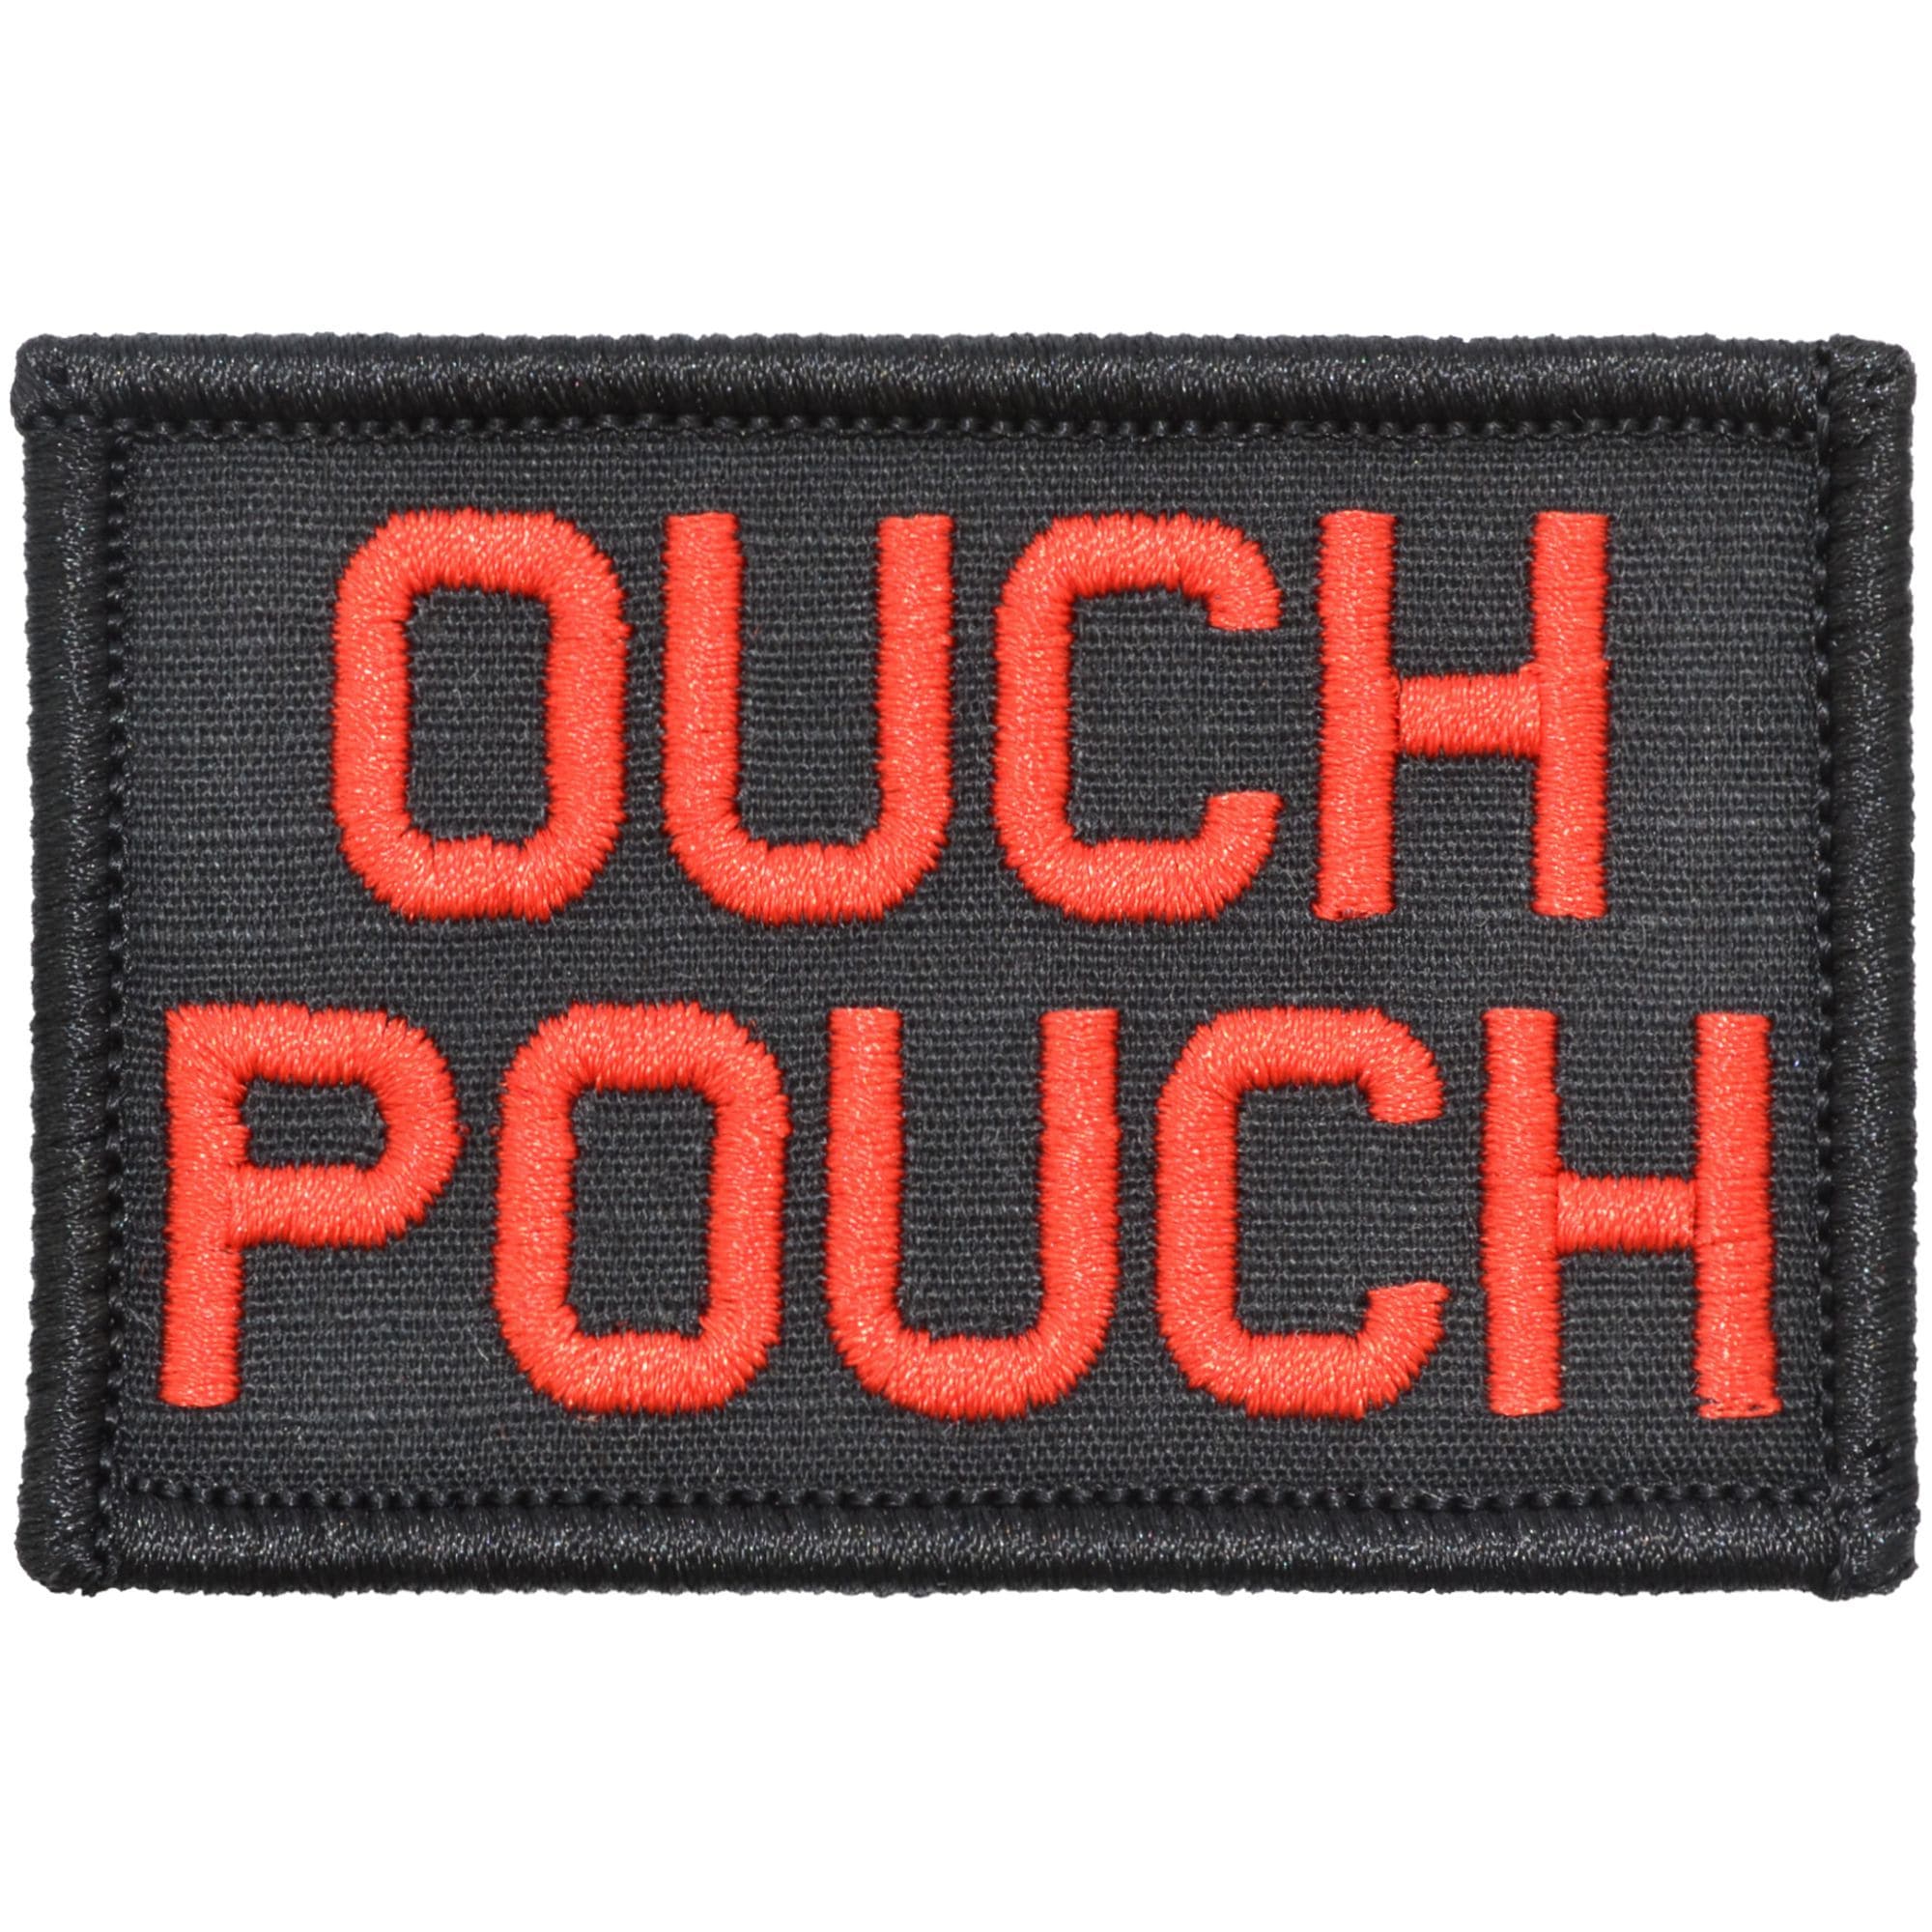 Service Dog Do Not Pet 2x3 Hook Backed Patch Black White Red